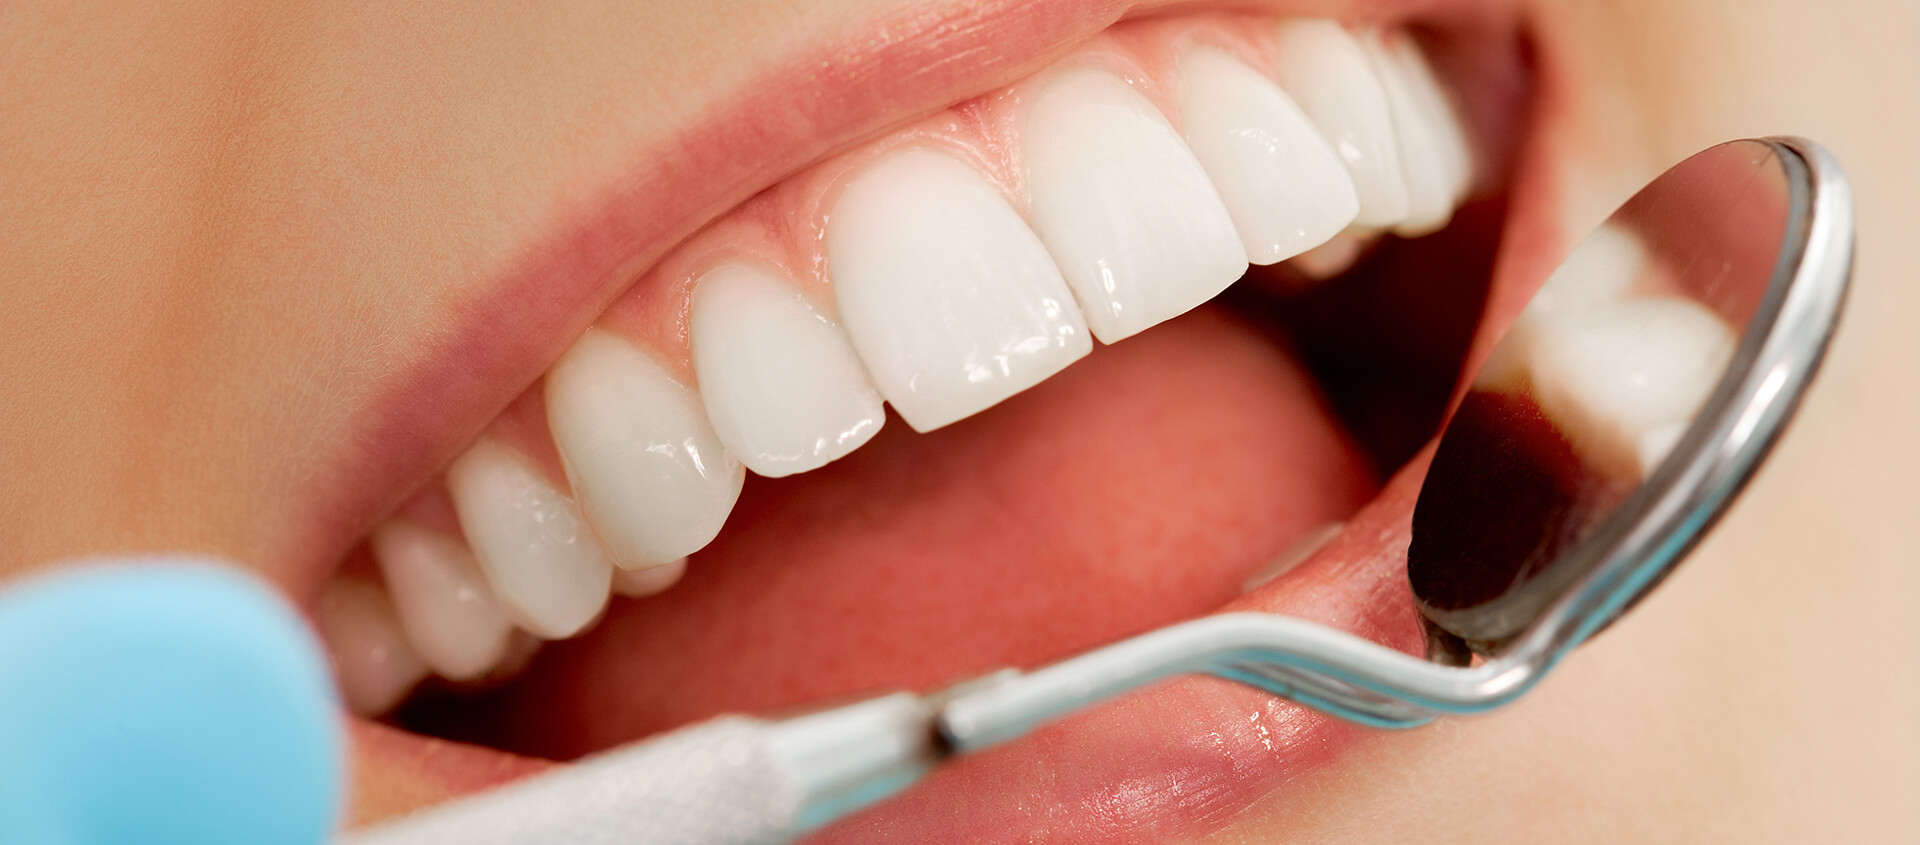 Stained Teeth Solution From Teeth Whitening Dentist in Brandon FL Area